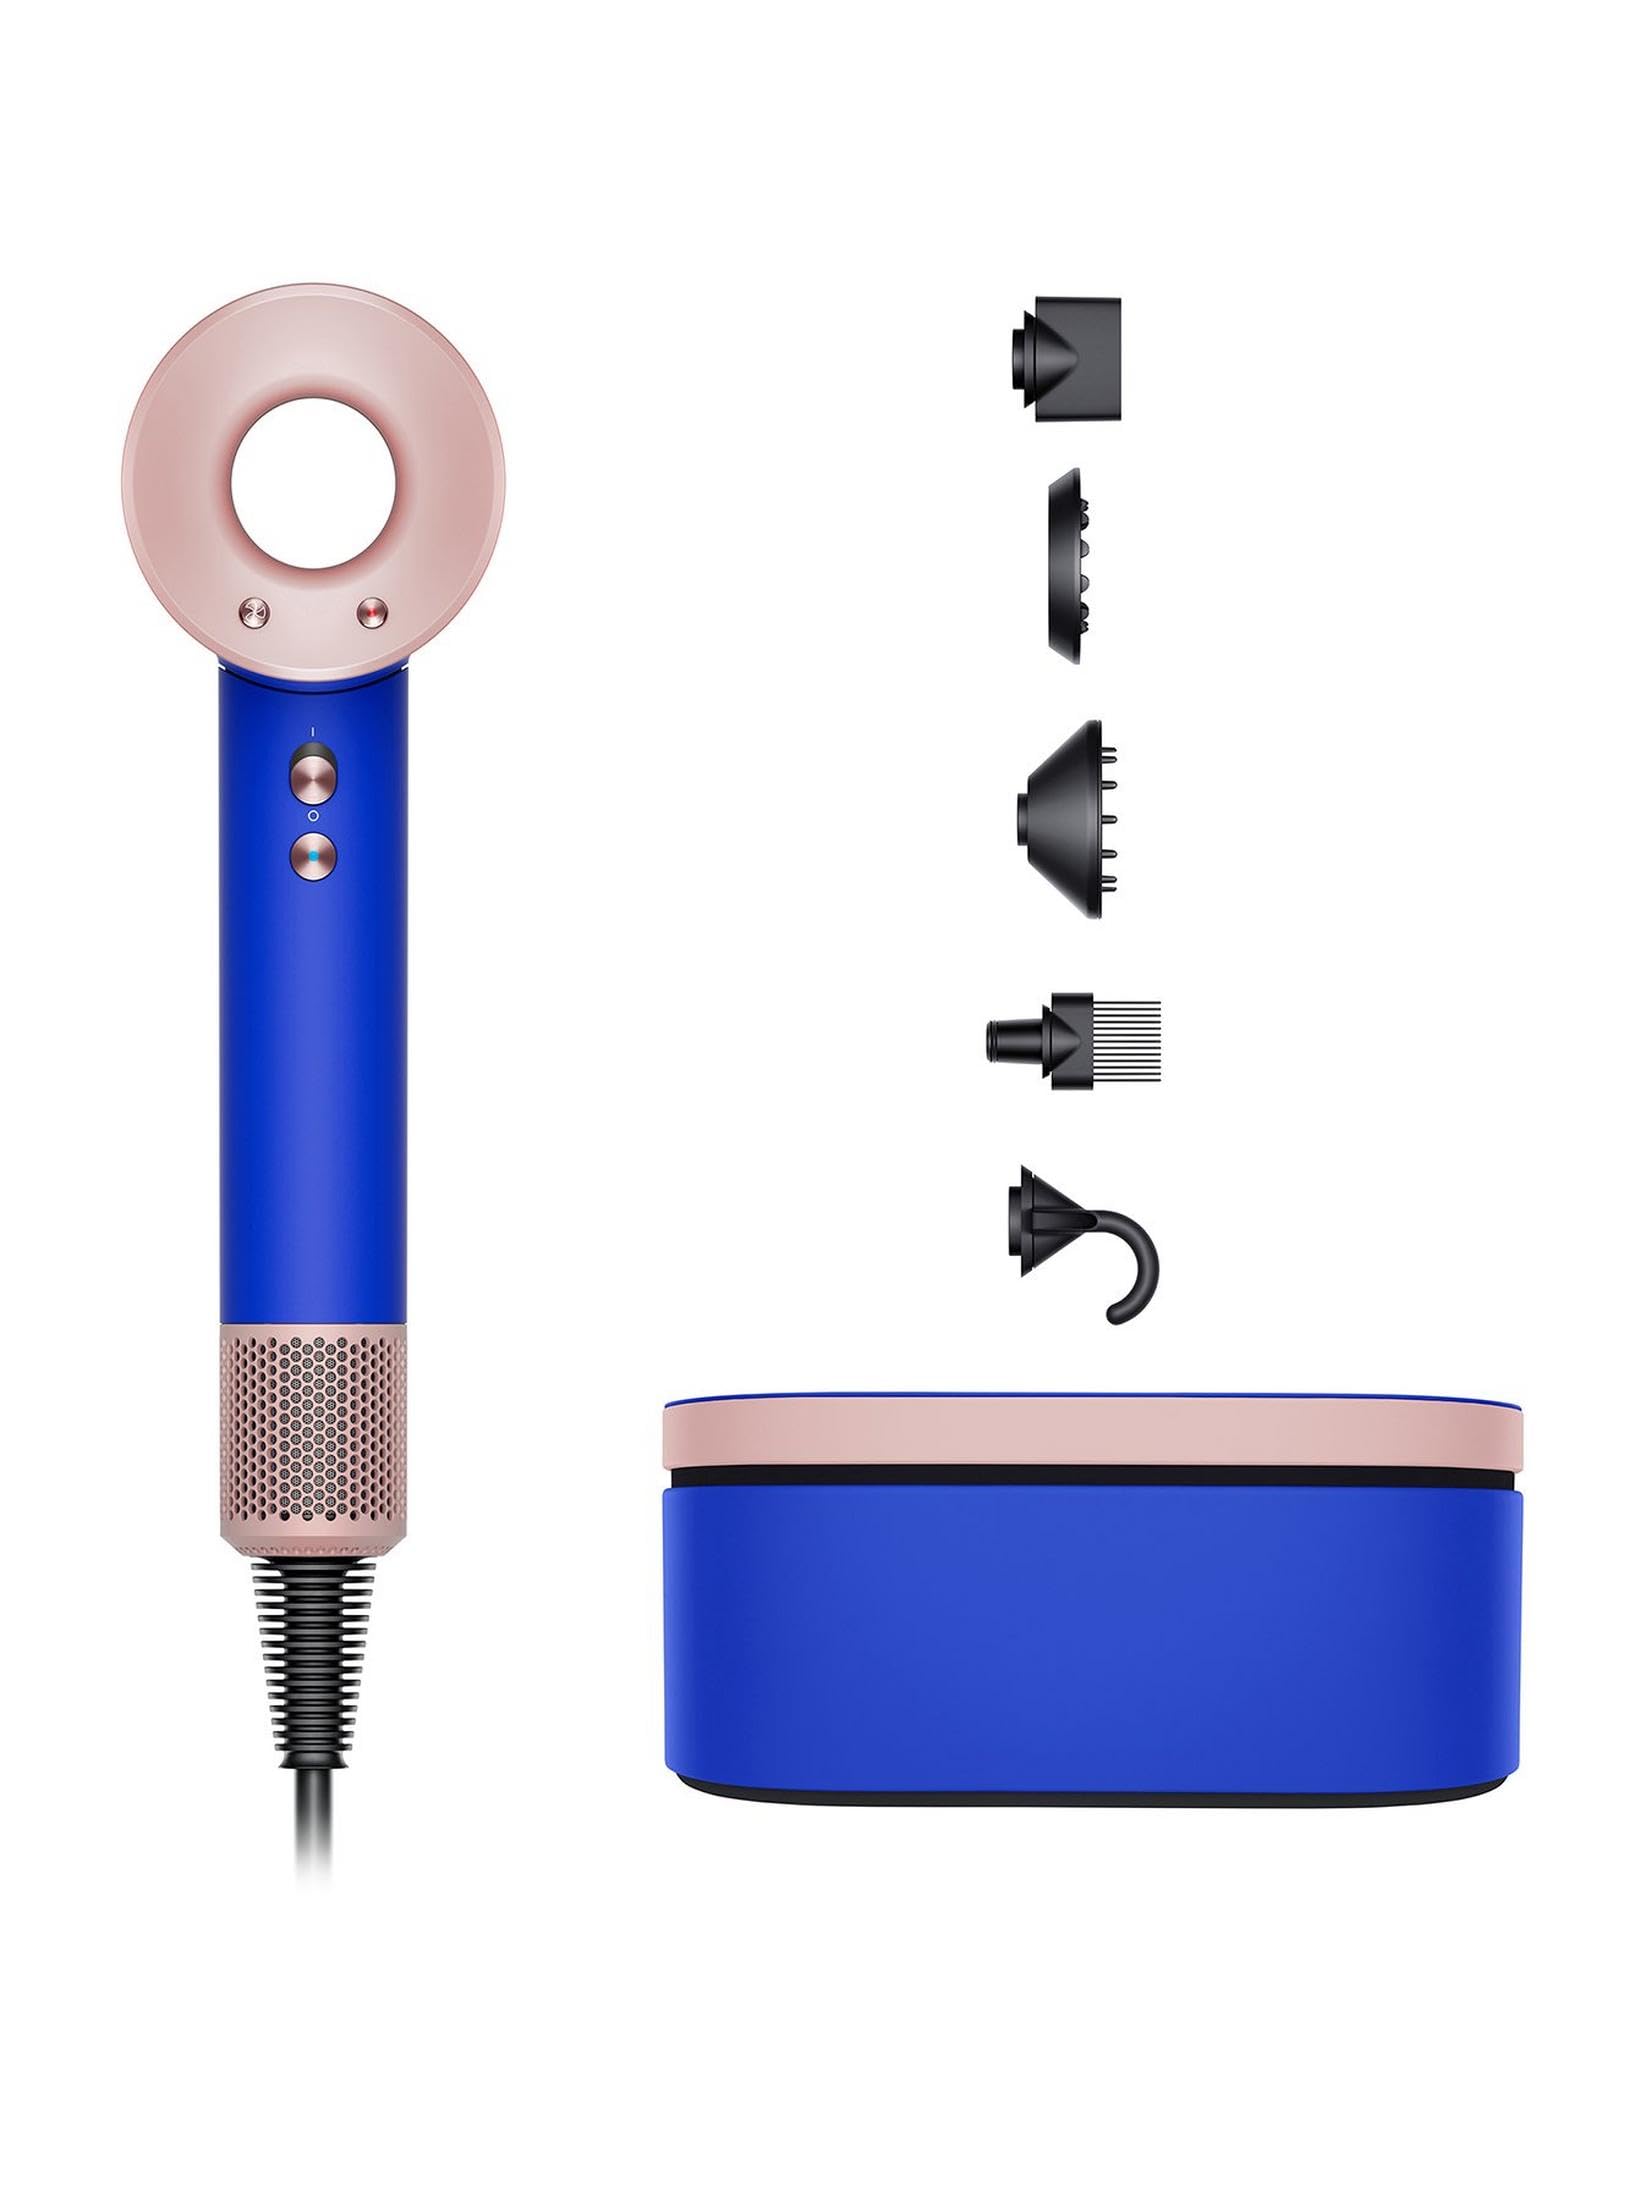 Dyson Supersonic HD07 hair dryer in Blue Blush